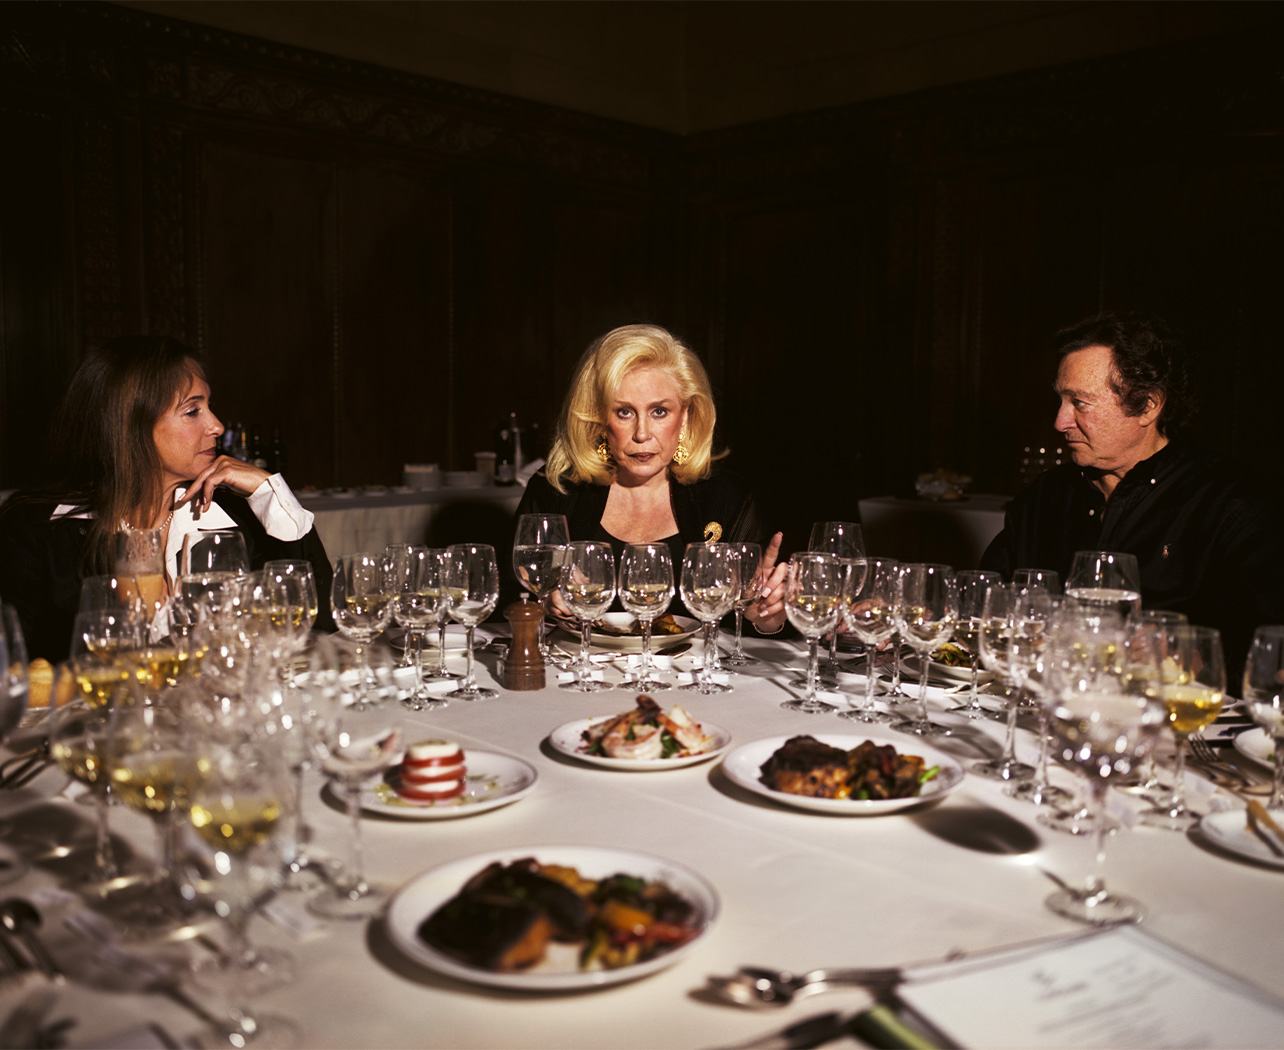 Photograph of three people sitting at a dining table